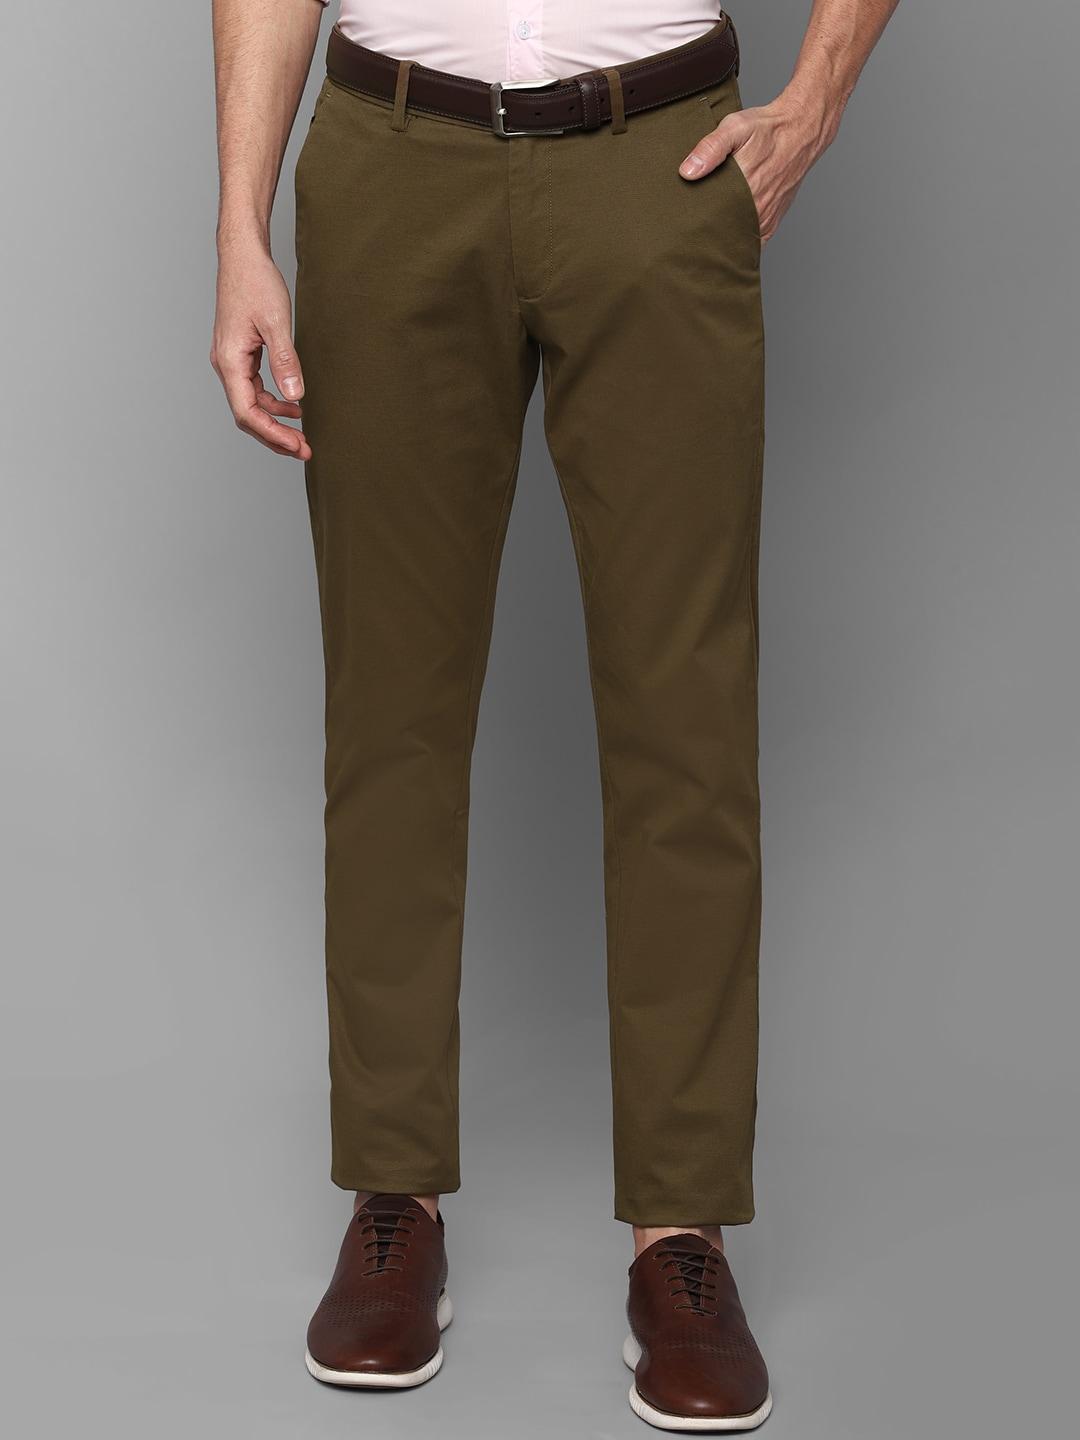 allen-solly-men-olive-green-slim-fit-mid-rise-casual-trousers